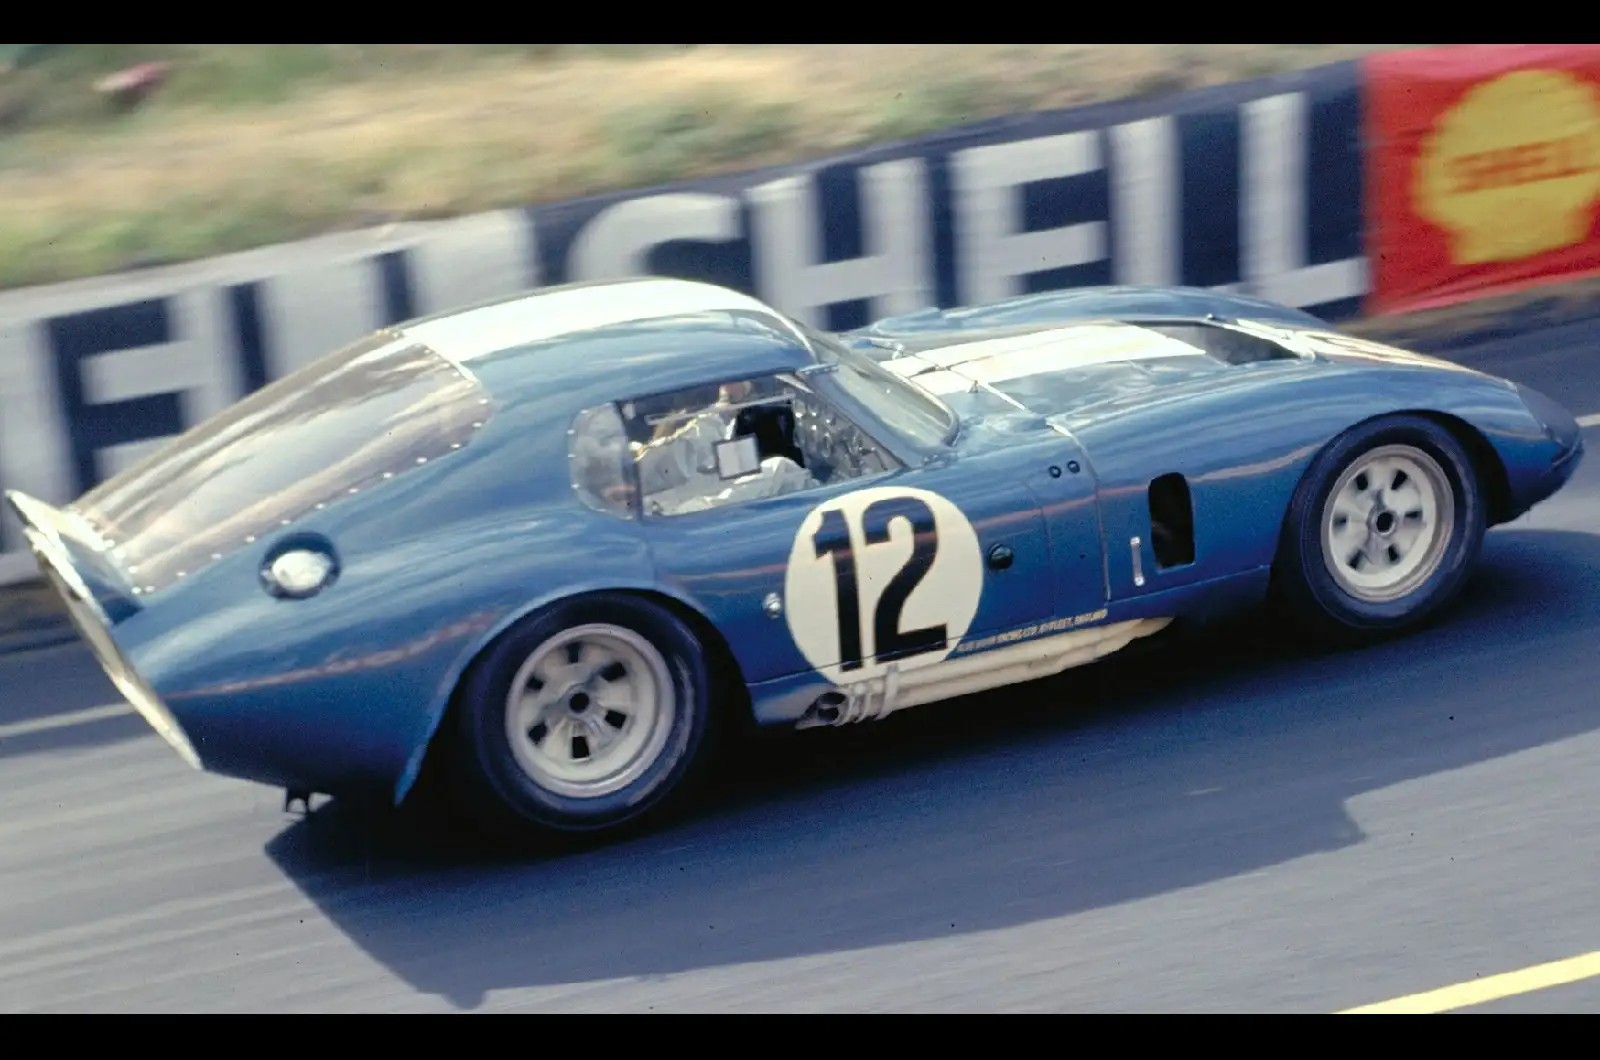 <p>If the Cobra proved that Americans could compete internationally, the Daytona variant proved that they could also win. Designed as an advanced evolution of the Cobra, the Shelby Daytona Coupe was specifically engineered to take on Ferrari’s 250 GTO in the GT class, utilizing a powerful American V8 engine.</p><p>While only six units were ever made, the Daytona Coupe earned notable victories at Sebring, Daytona, and Le Mans, and set multiple speed records at Bonneville. It not only won America its first FIA World Manufacturers Championship, but also became the first vehicle documented as an important national treasure.</p>